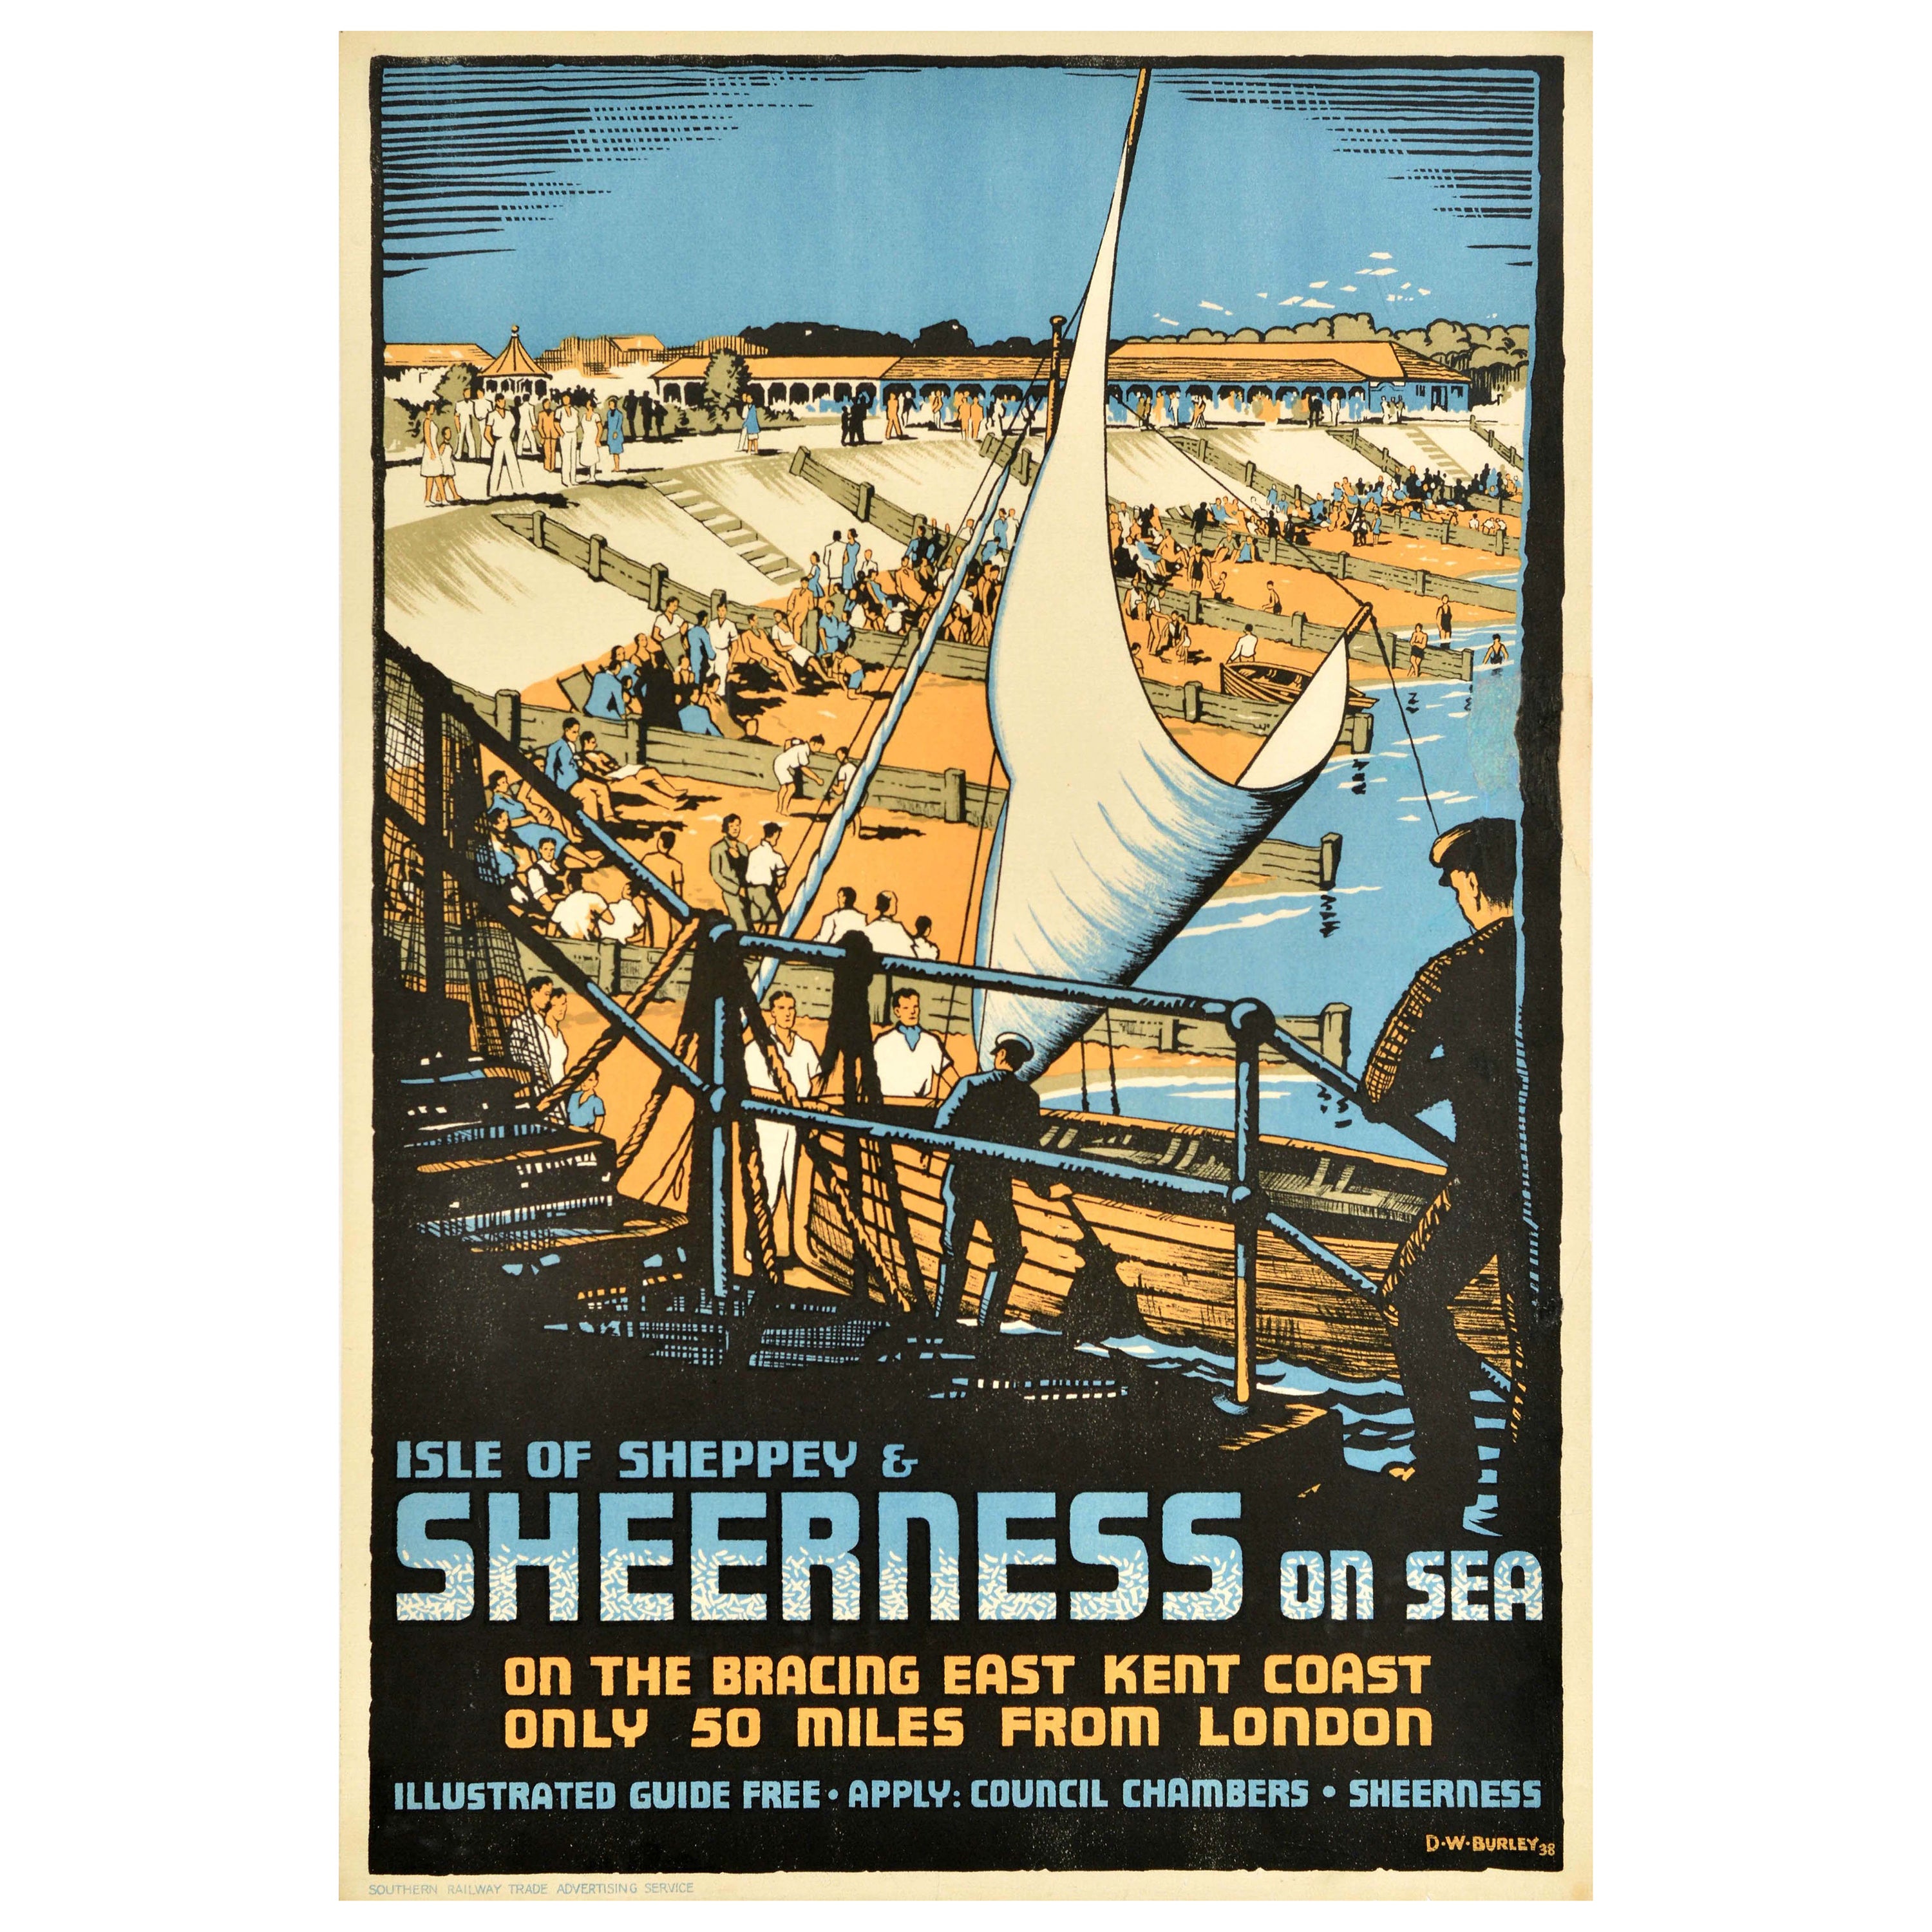 Original Vintage Travel Poster Sheerness On Sea Isle Of Sheppey Kent Railway For Sale